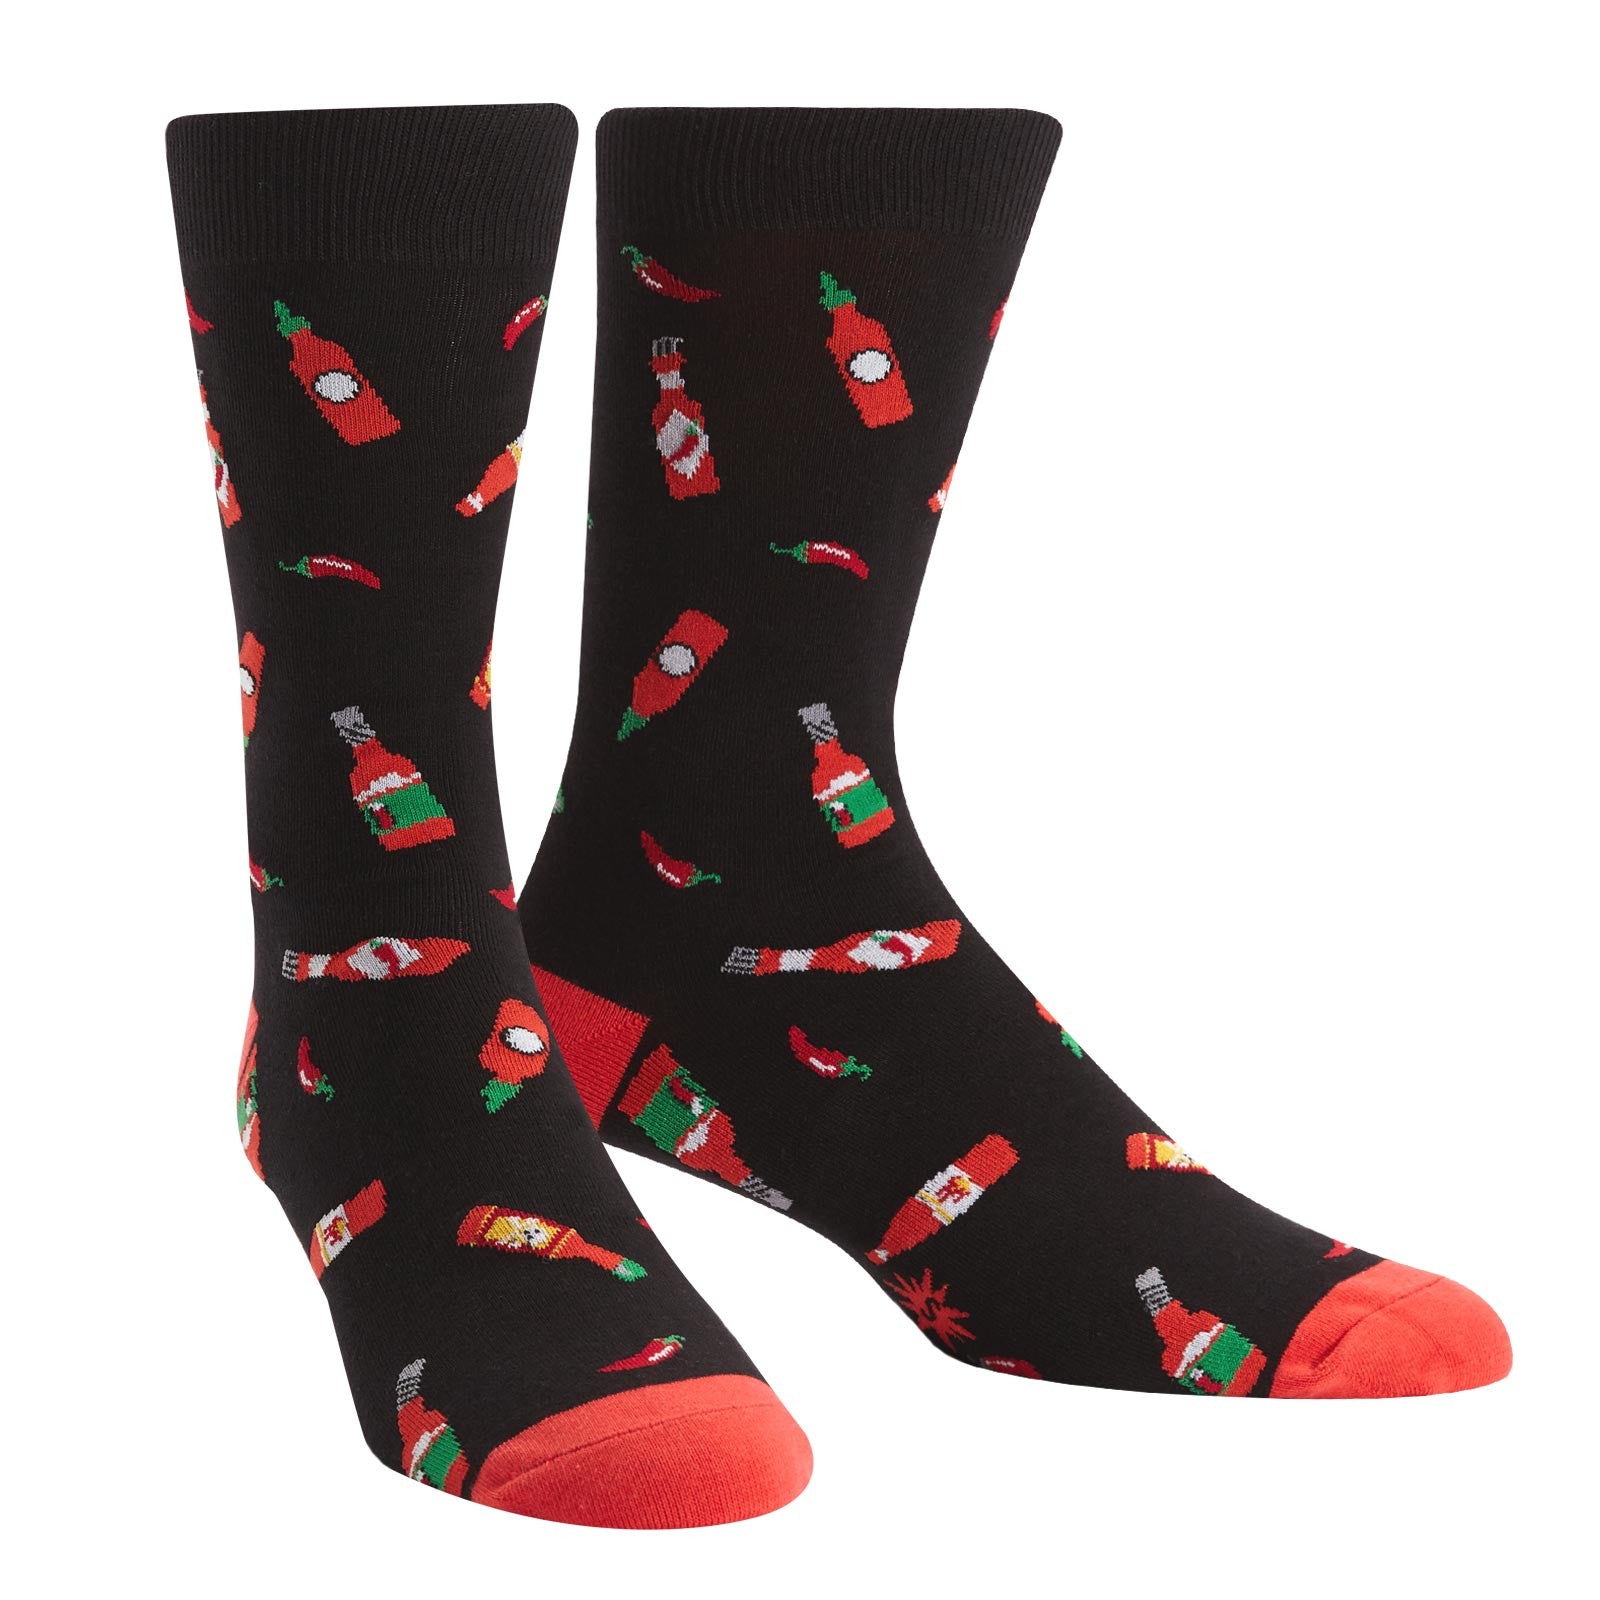 Hot sauce bottles and spicy chilis on men's socks gives a new definition to the phrase “hot foot”!